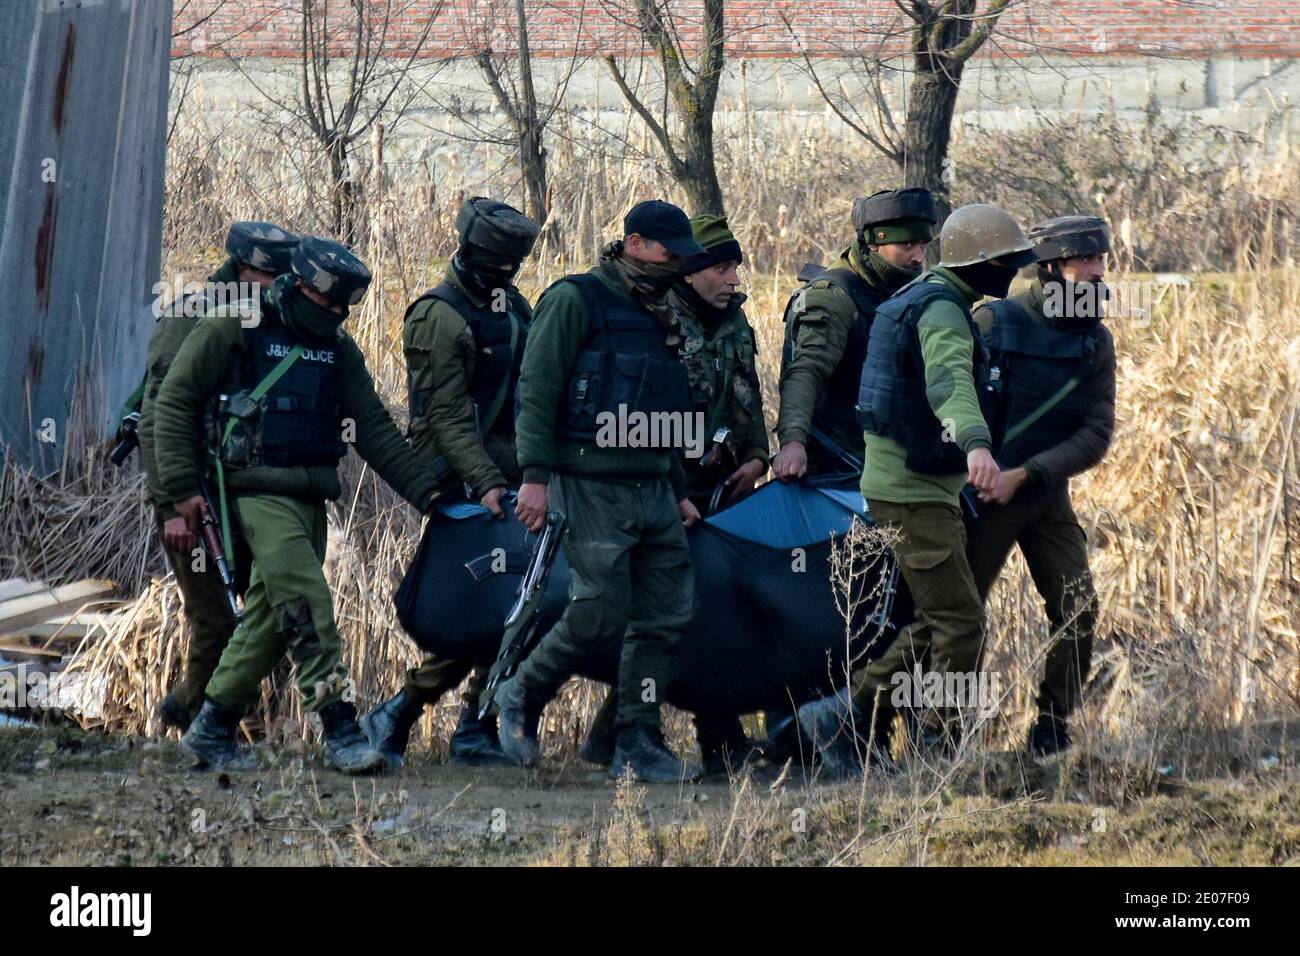 December 30, 2020: Indian forces recover the dead bodies believed to be of militants from an encounter site in HMT area of Srinagar, Indian Administered Kashmir on 30 December2020. Three millitants were killed in an overnight encounter with Indian Forces. Credit: Muzamil Mattoo/IMAGESLIVE/ZUMA Wire/Alamy Live News Stock Photo